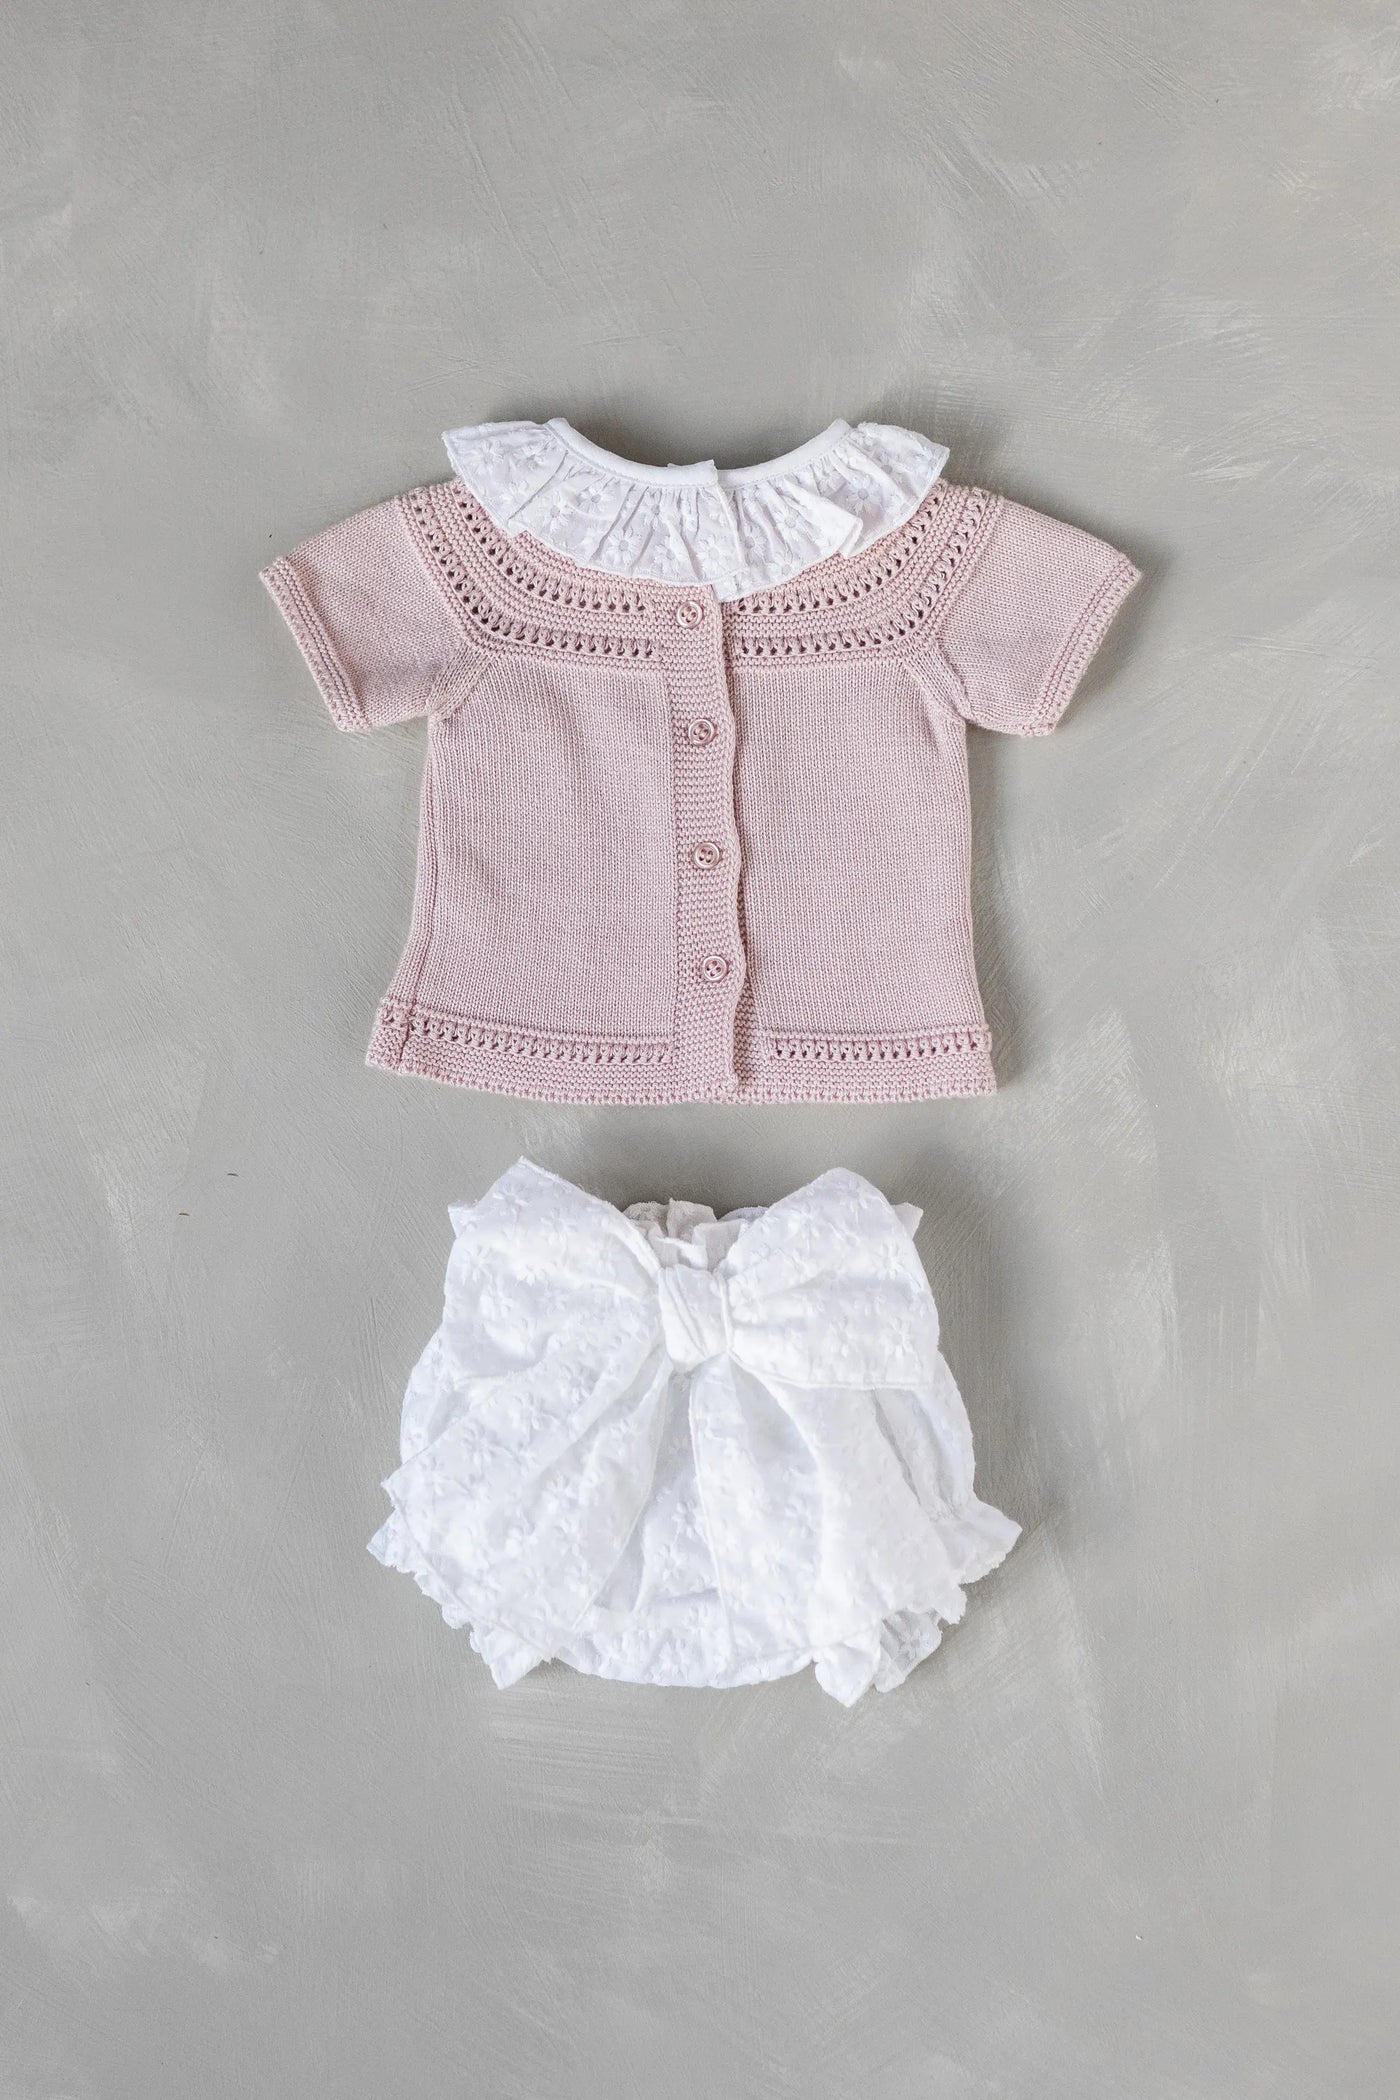 Dusty Rose Knit Top & White Bow Bloomers